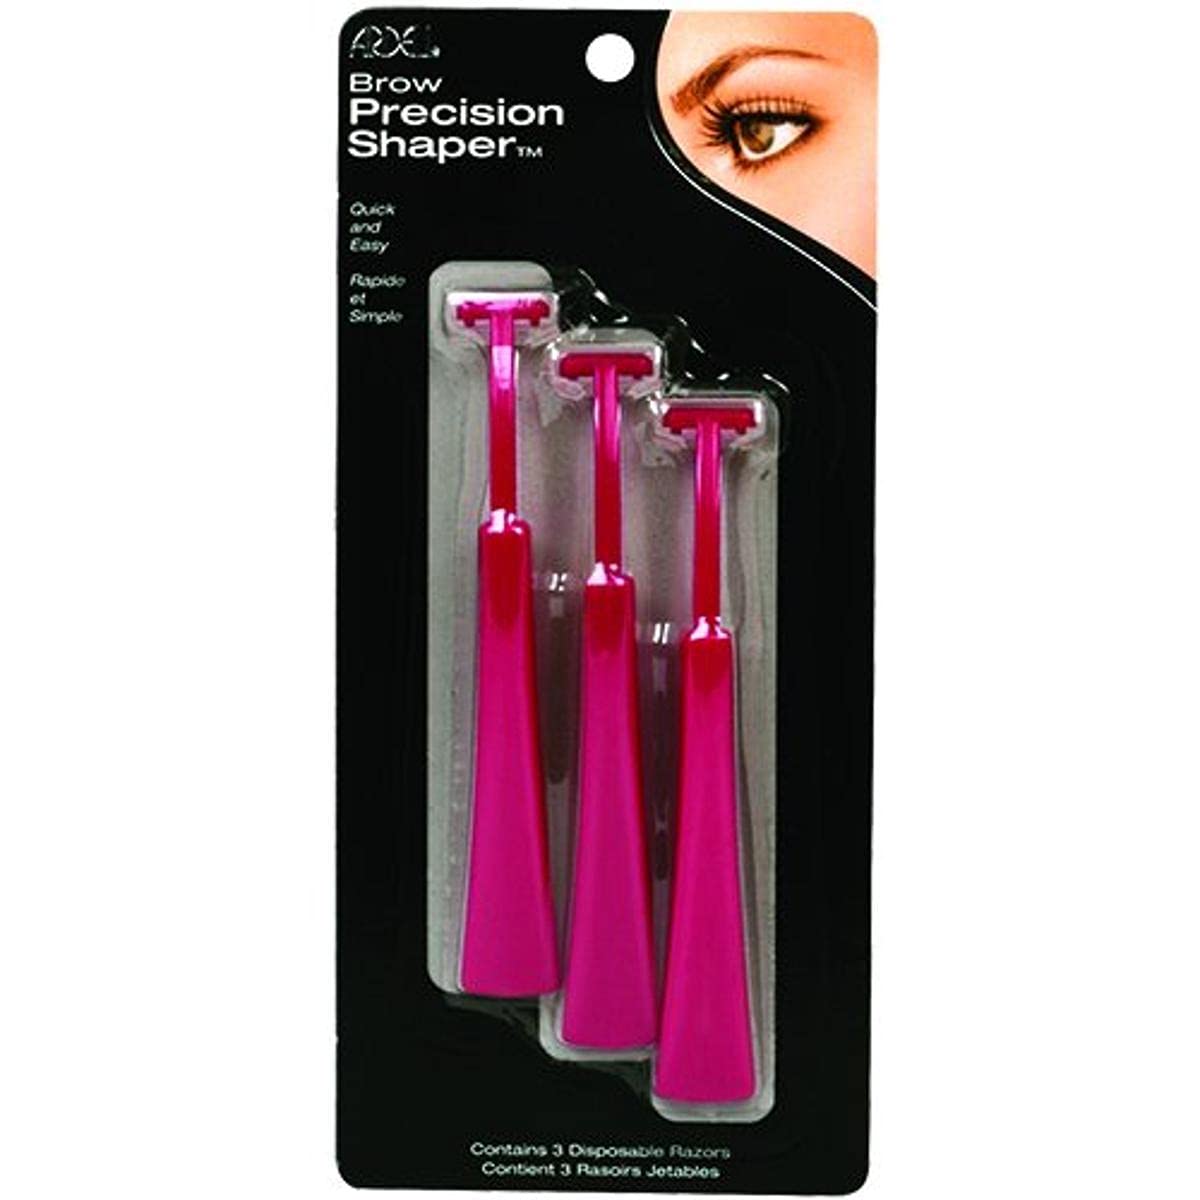 Ardell Brow Precision Shaper, 3 Count (Pack of 3)